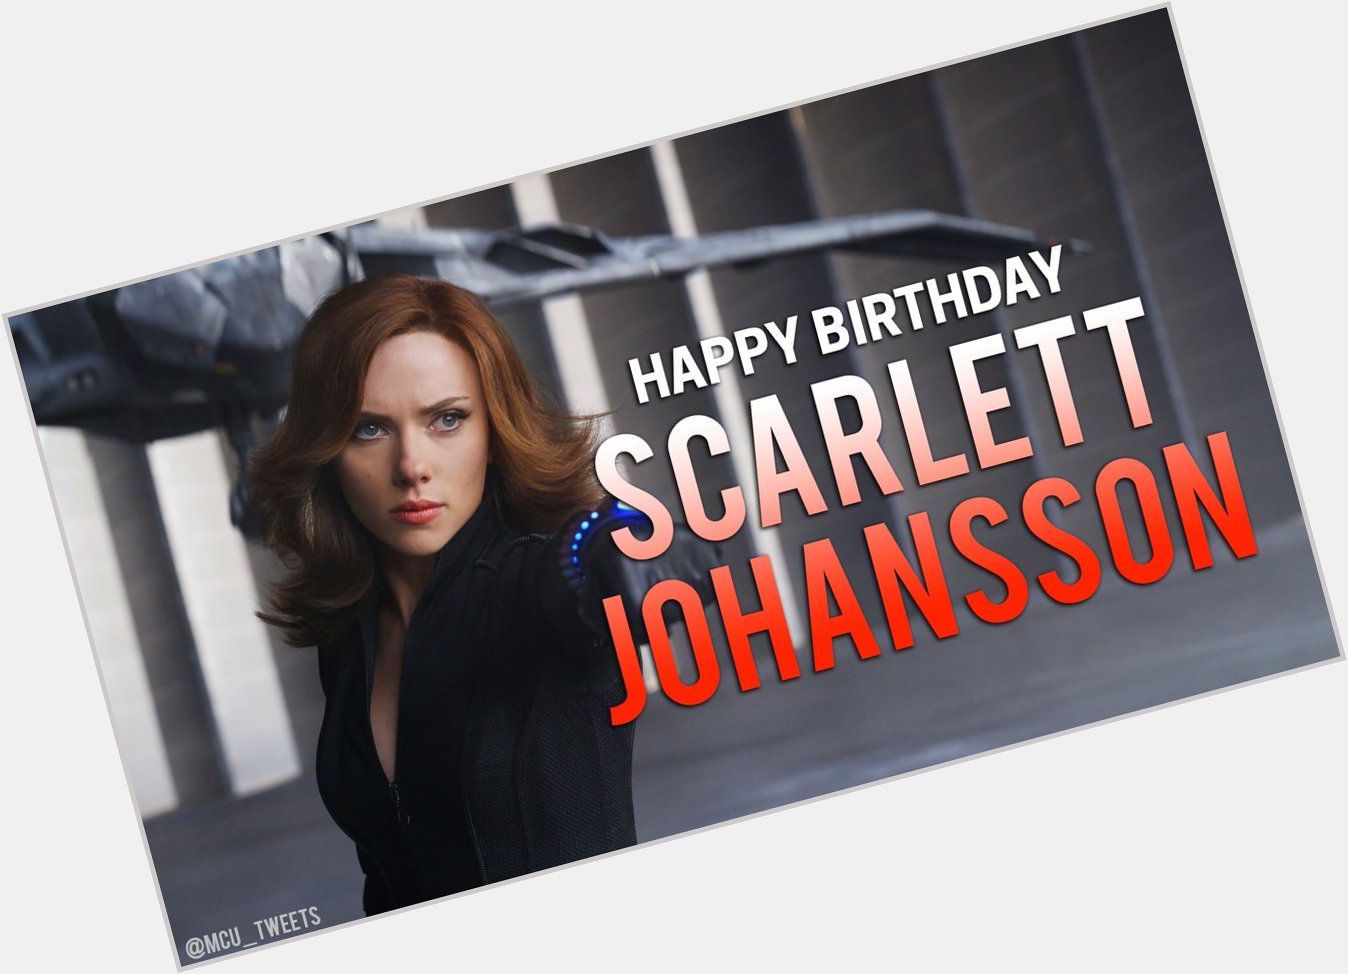 Join us in wishing the Black Widow of the MCU, Scarlett Johansson, a very happy 33rd birthday! 